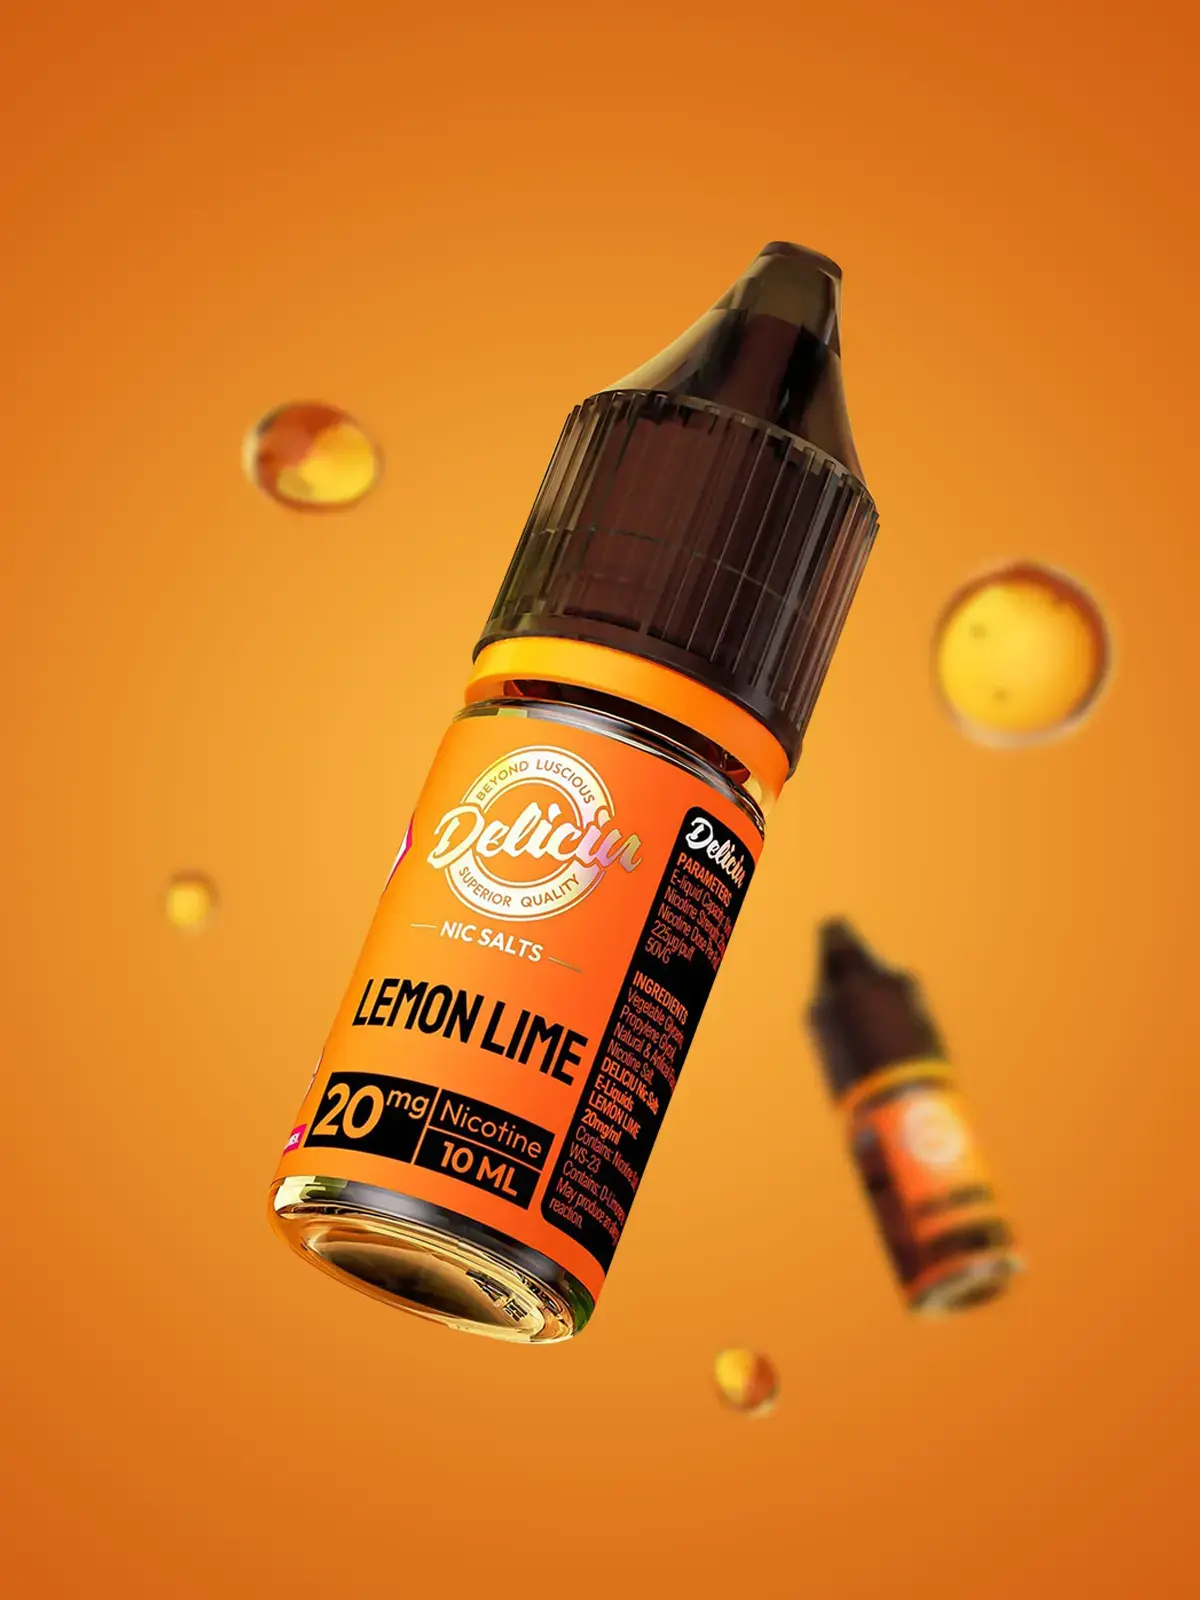 A floating bottle of Lemon Lime Deliciu nic salts e-liquid by Vaporesso floating in front of an orange background with liquid droplets